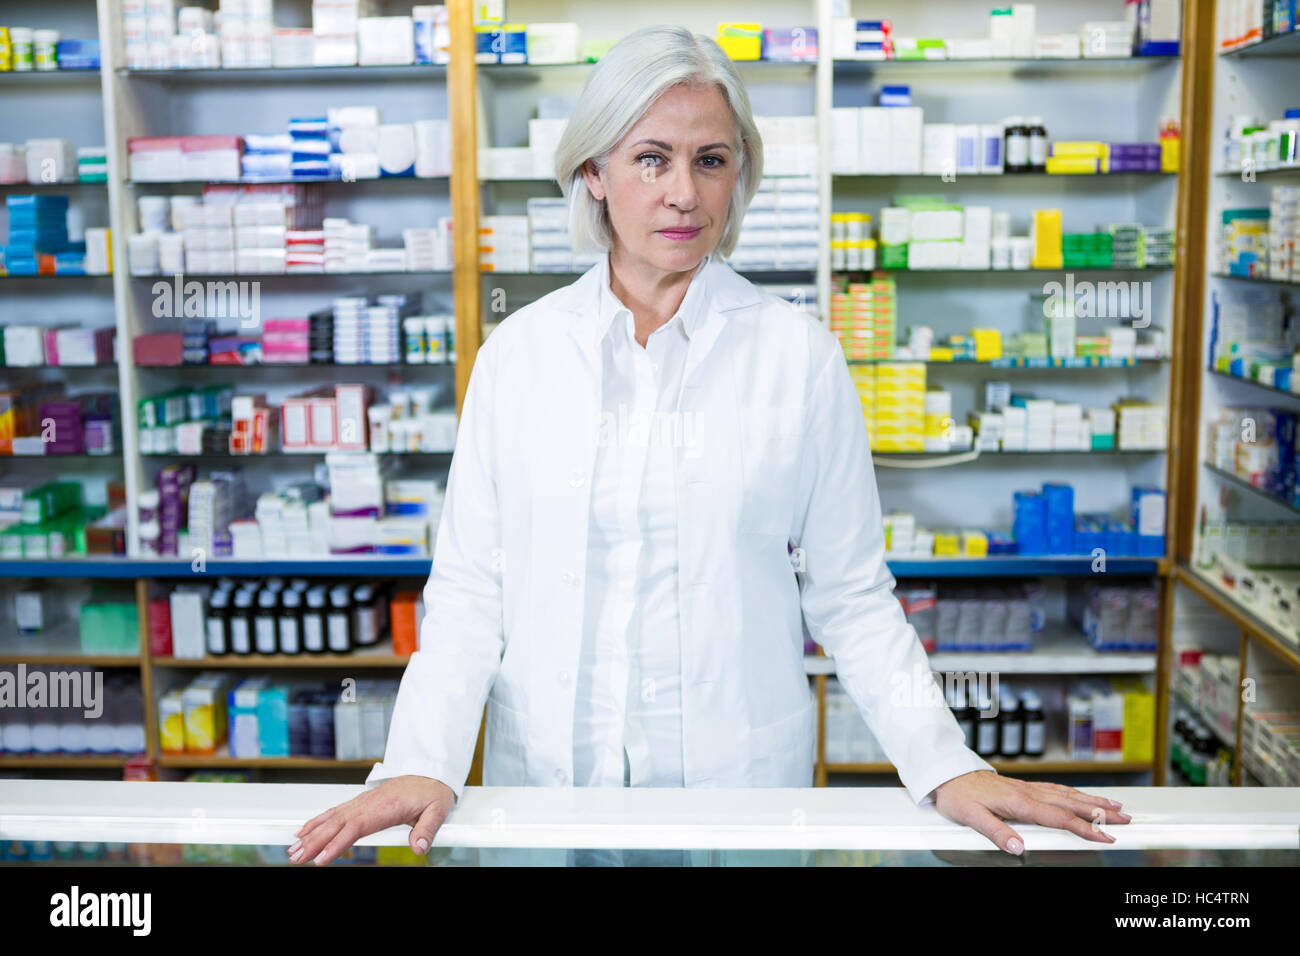 Pharmacist standing at counter Stock Photo